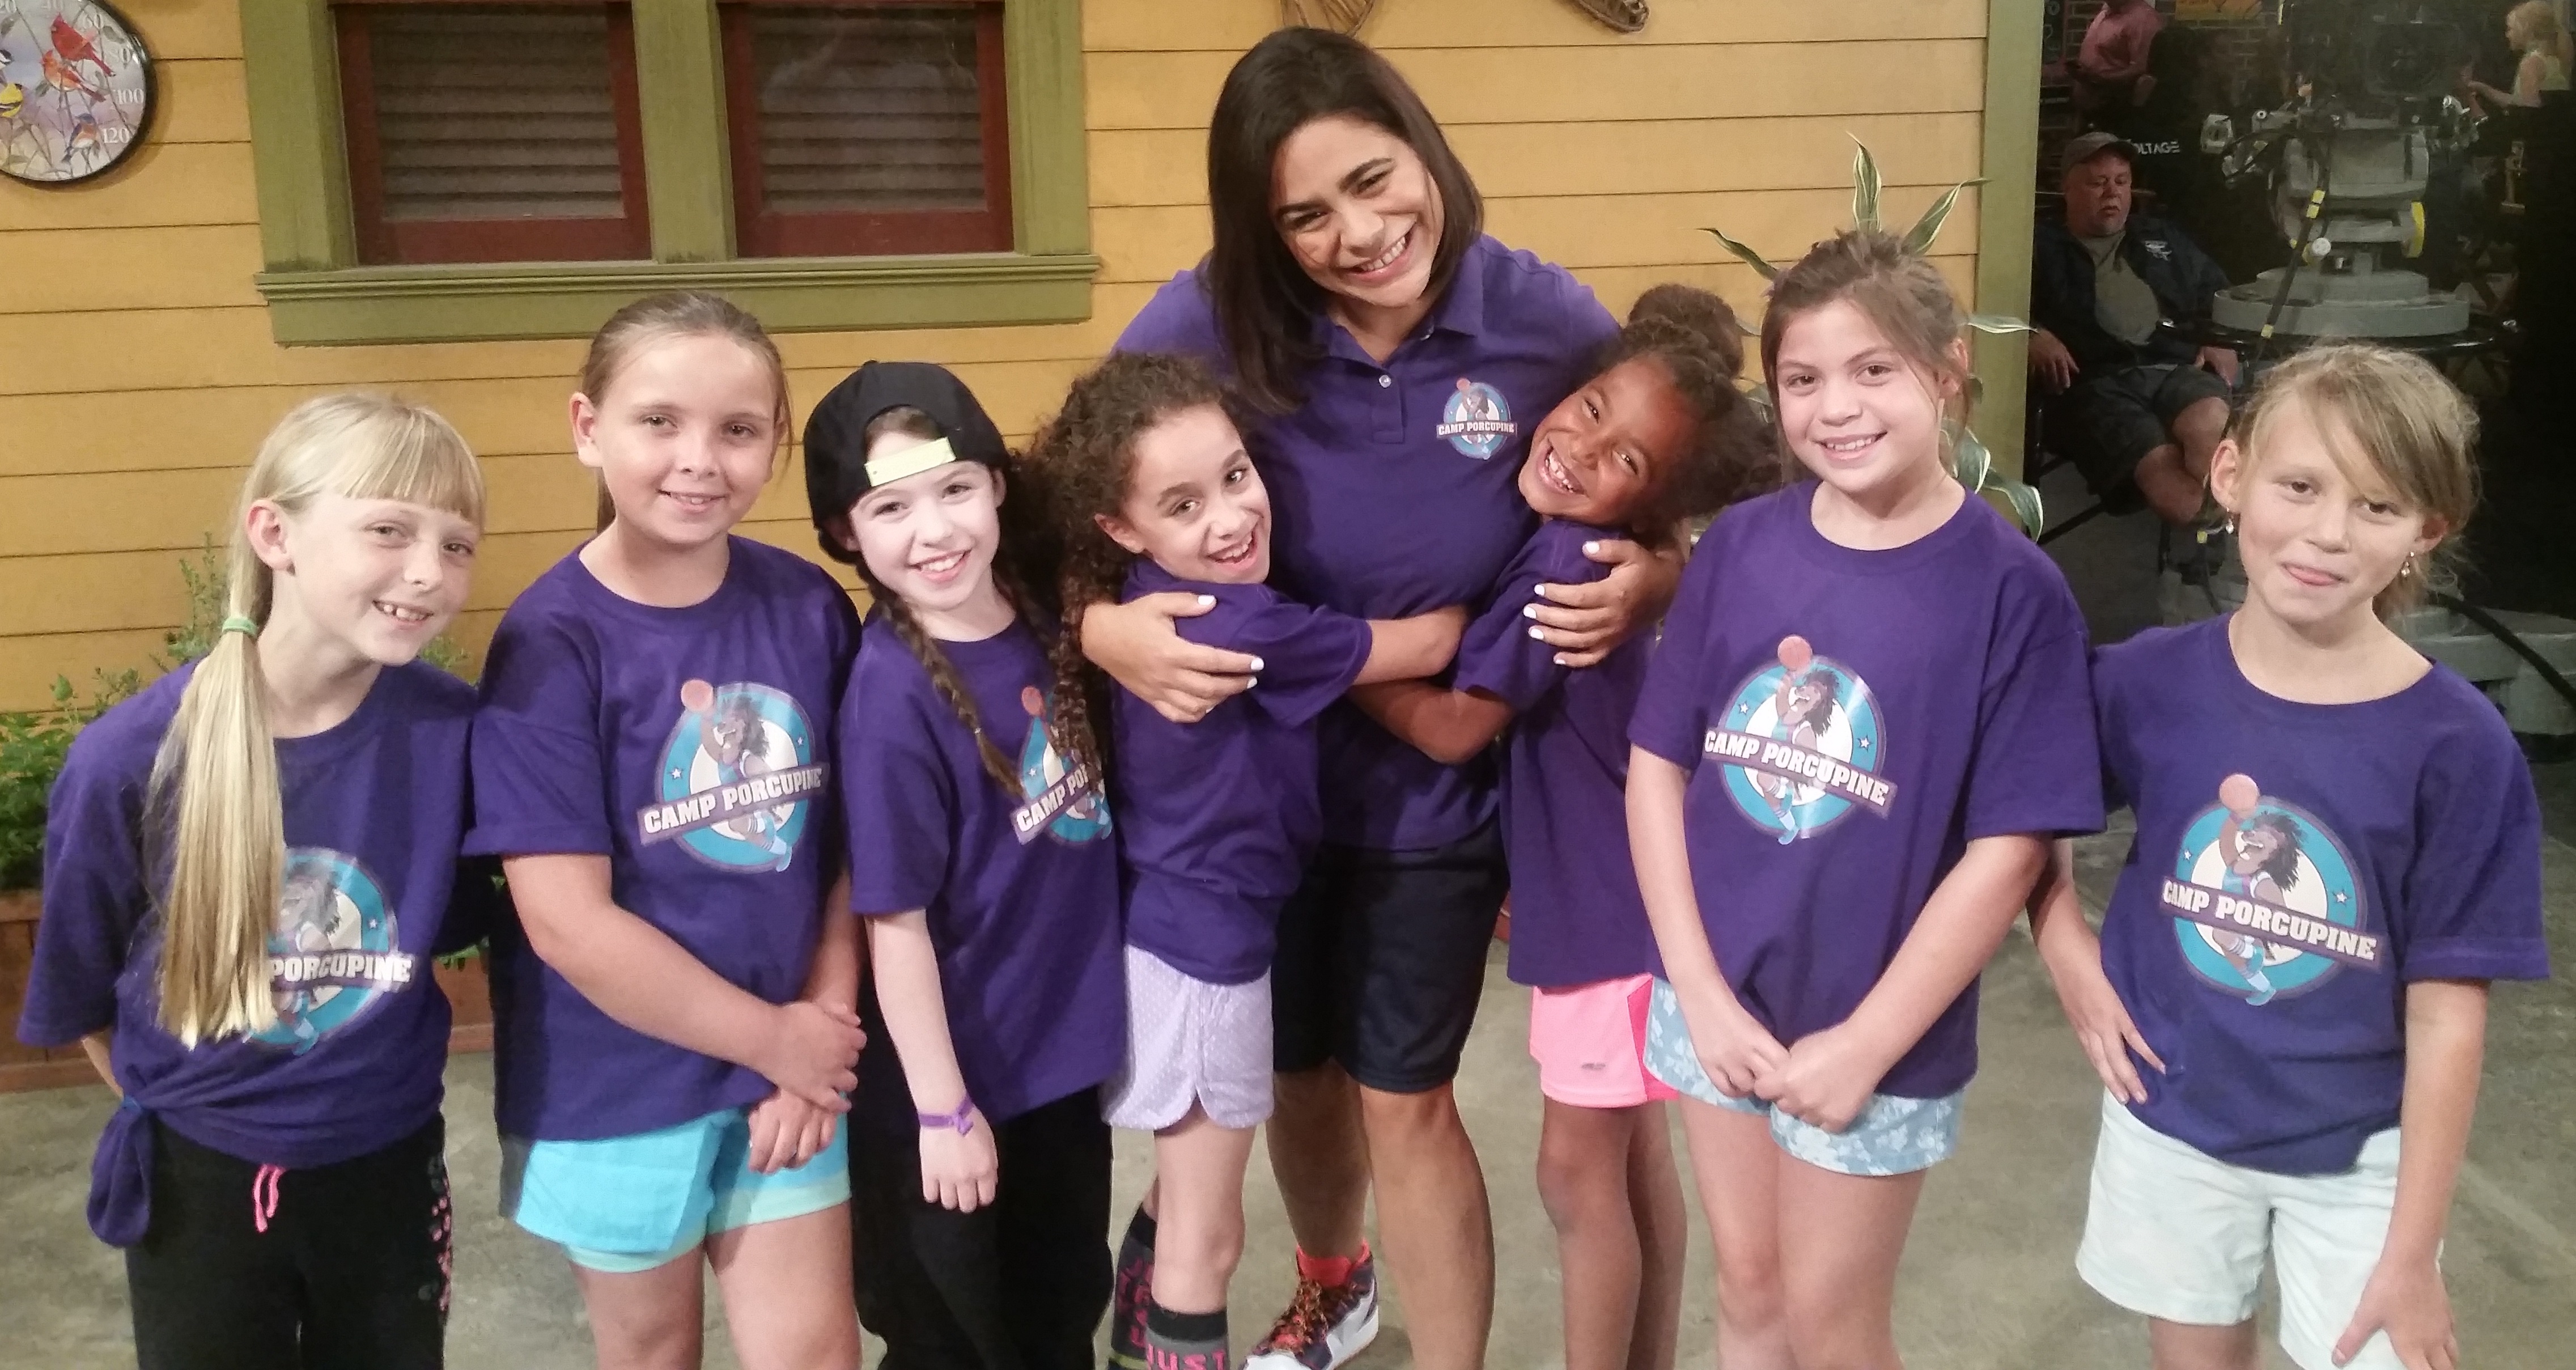 Ashlyn on the set of Liv and Maddie with Jessica Marie Garcia, April Marshall-Miller, and all of the Camp Porcupine girls! Go Porcupines! Eep, Eep, Eep!